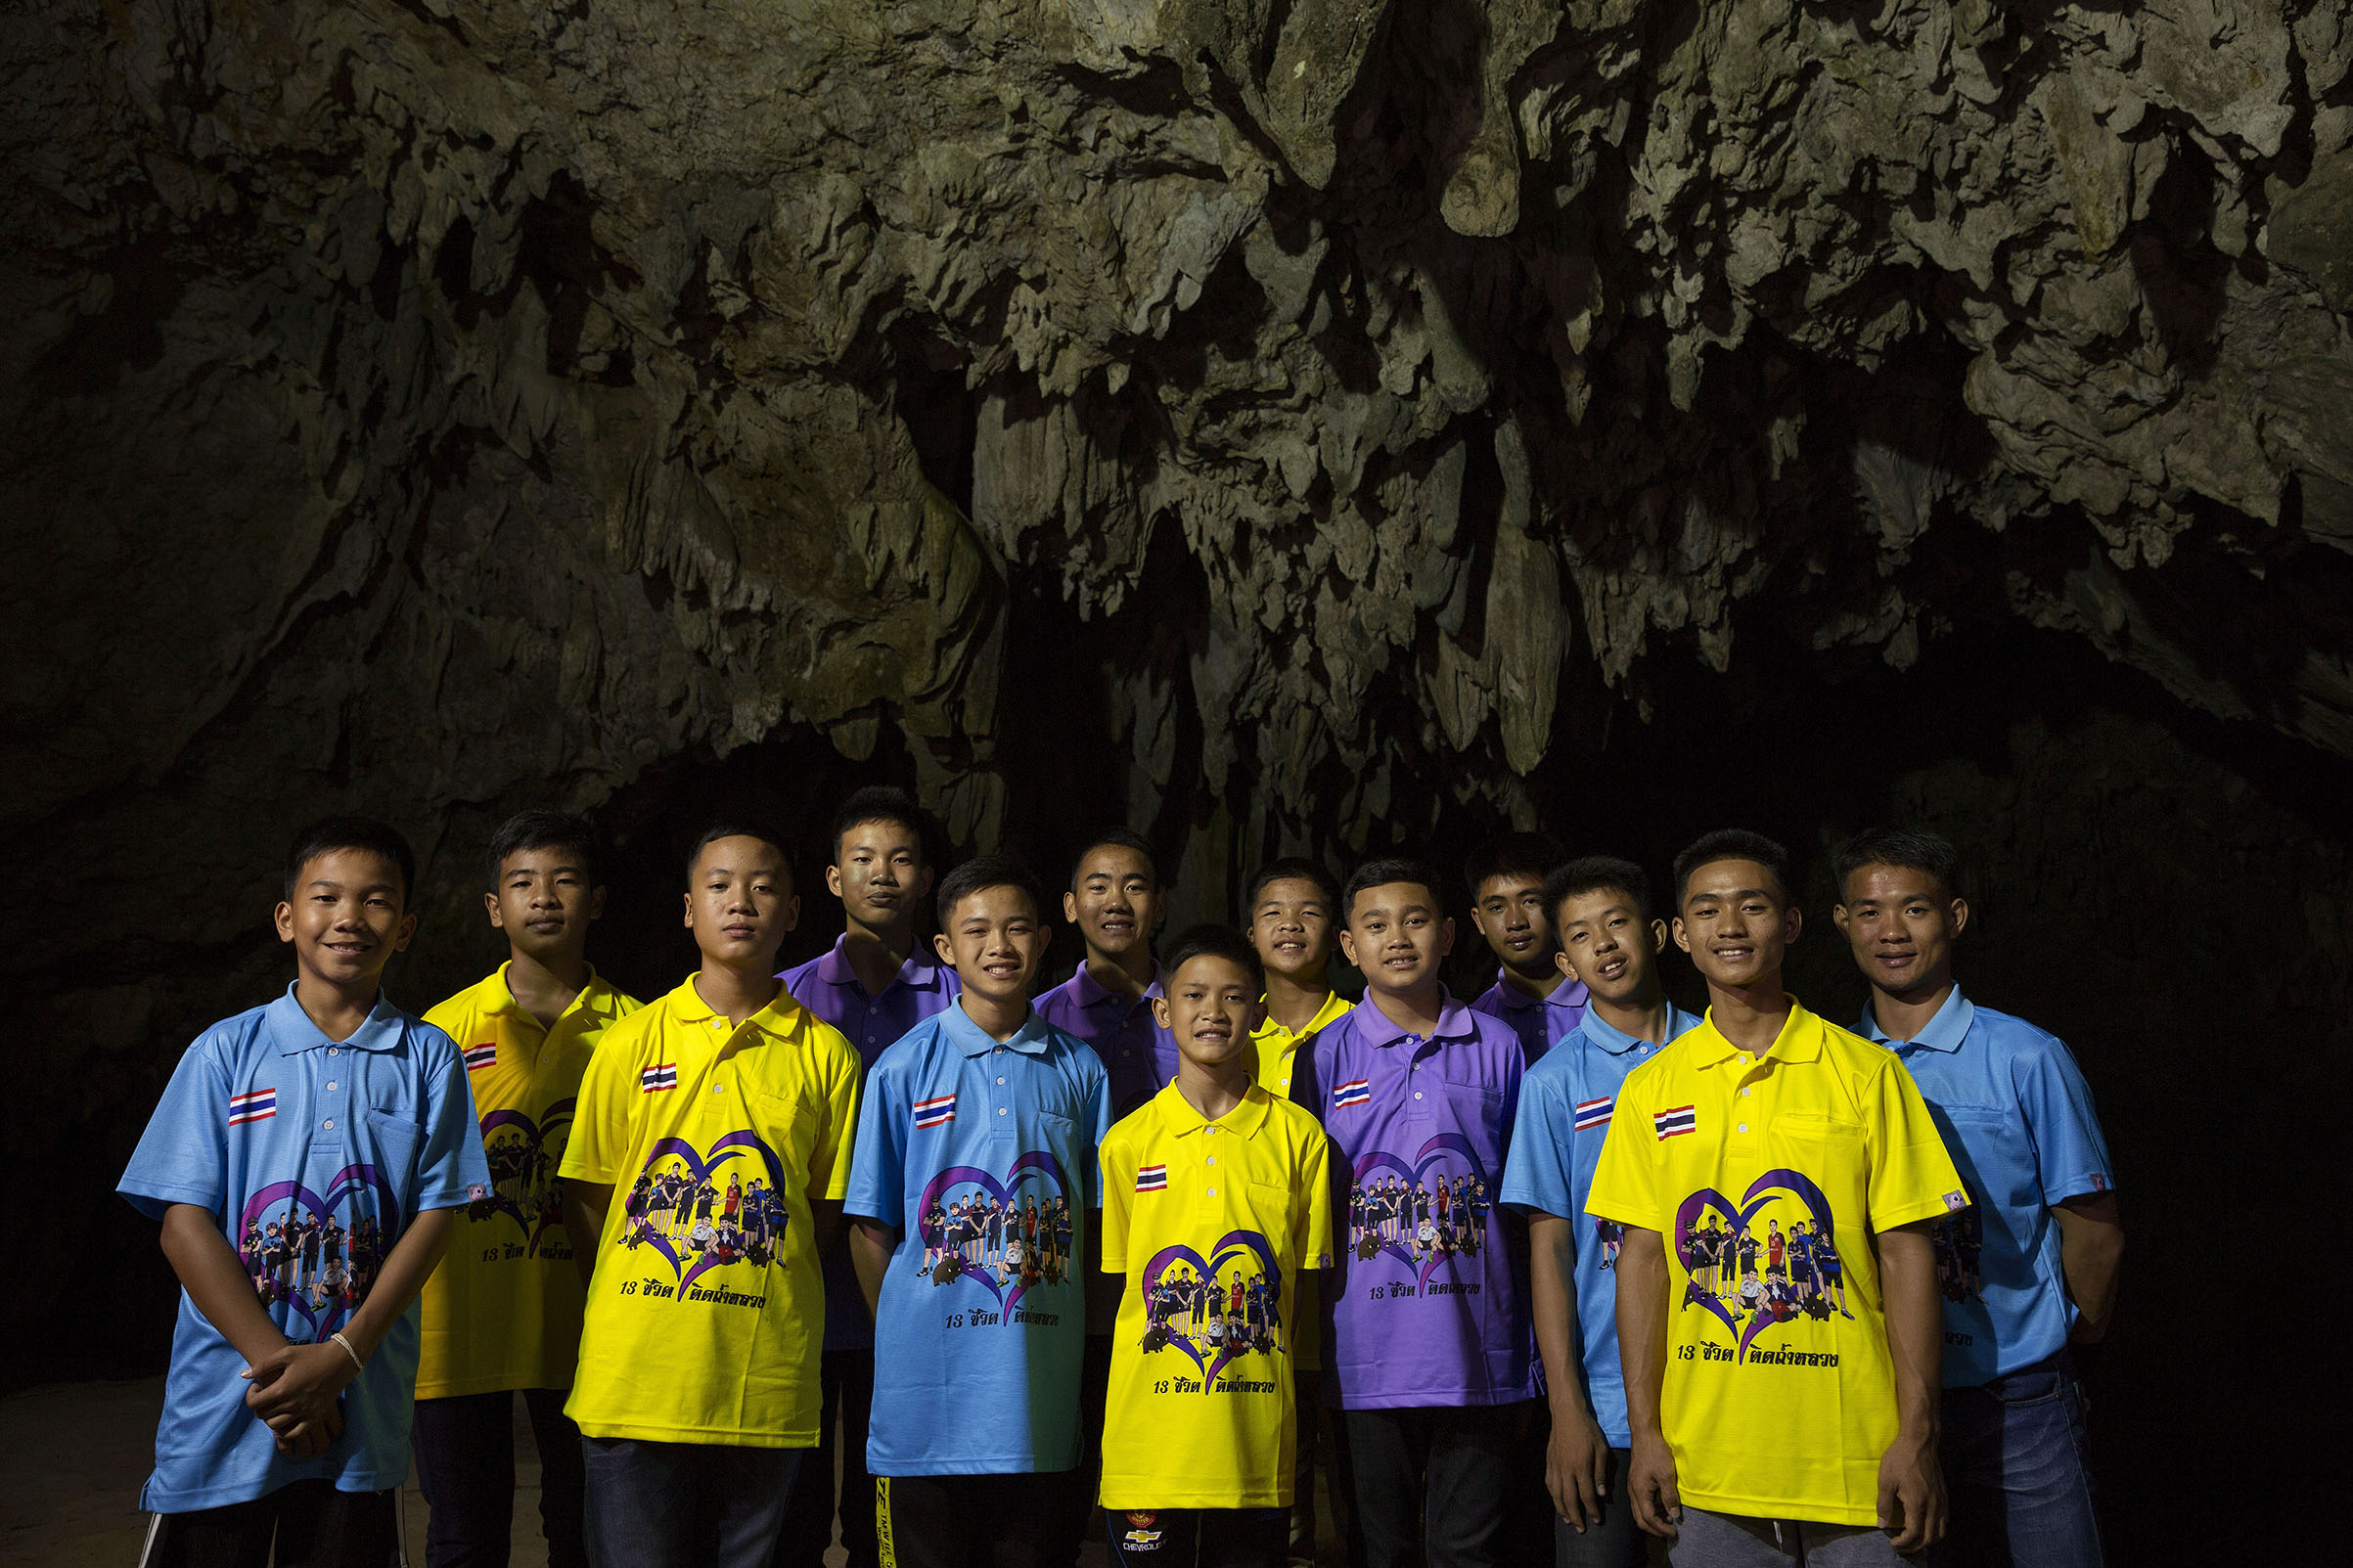 Nearly six months after the rescue, the team poses at the entrance to Tham Luang Cave (Photograph by TIME)